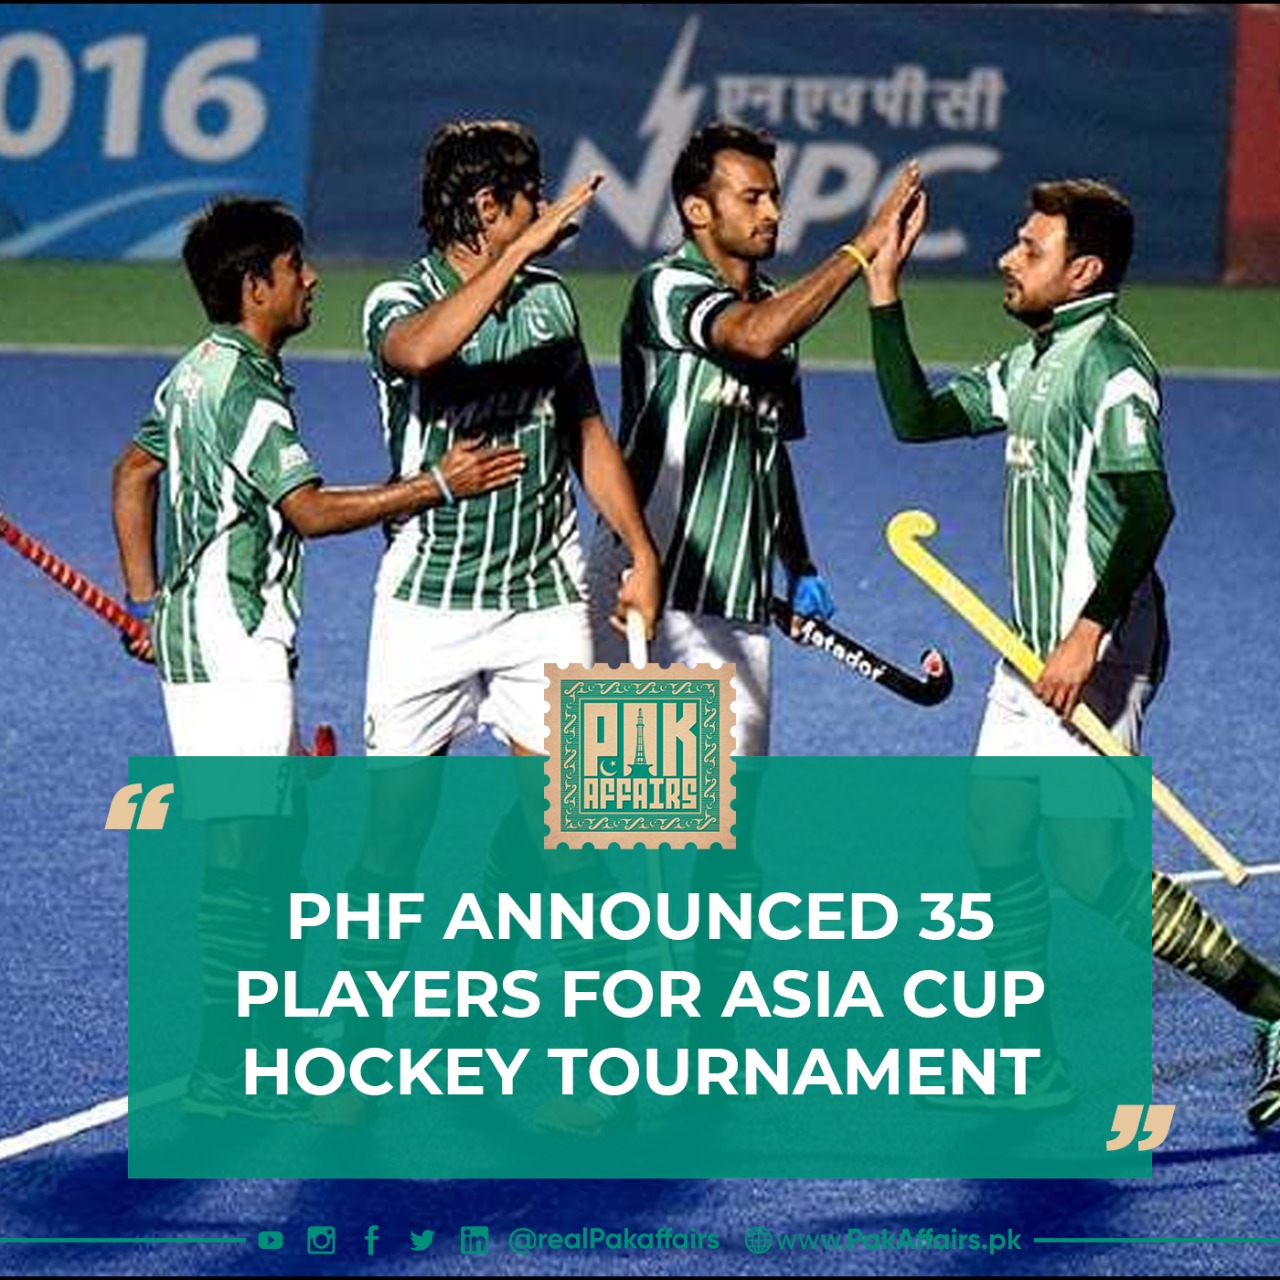 PHF announced 35 players for Asia Cup Hockey Tournament.